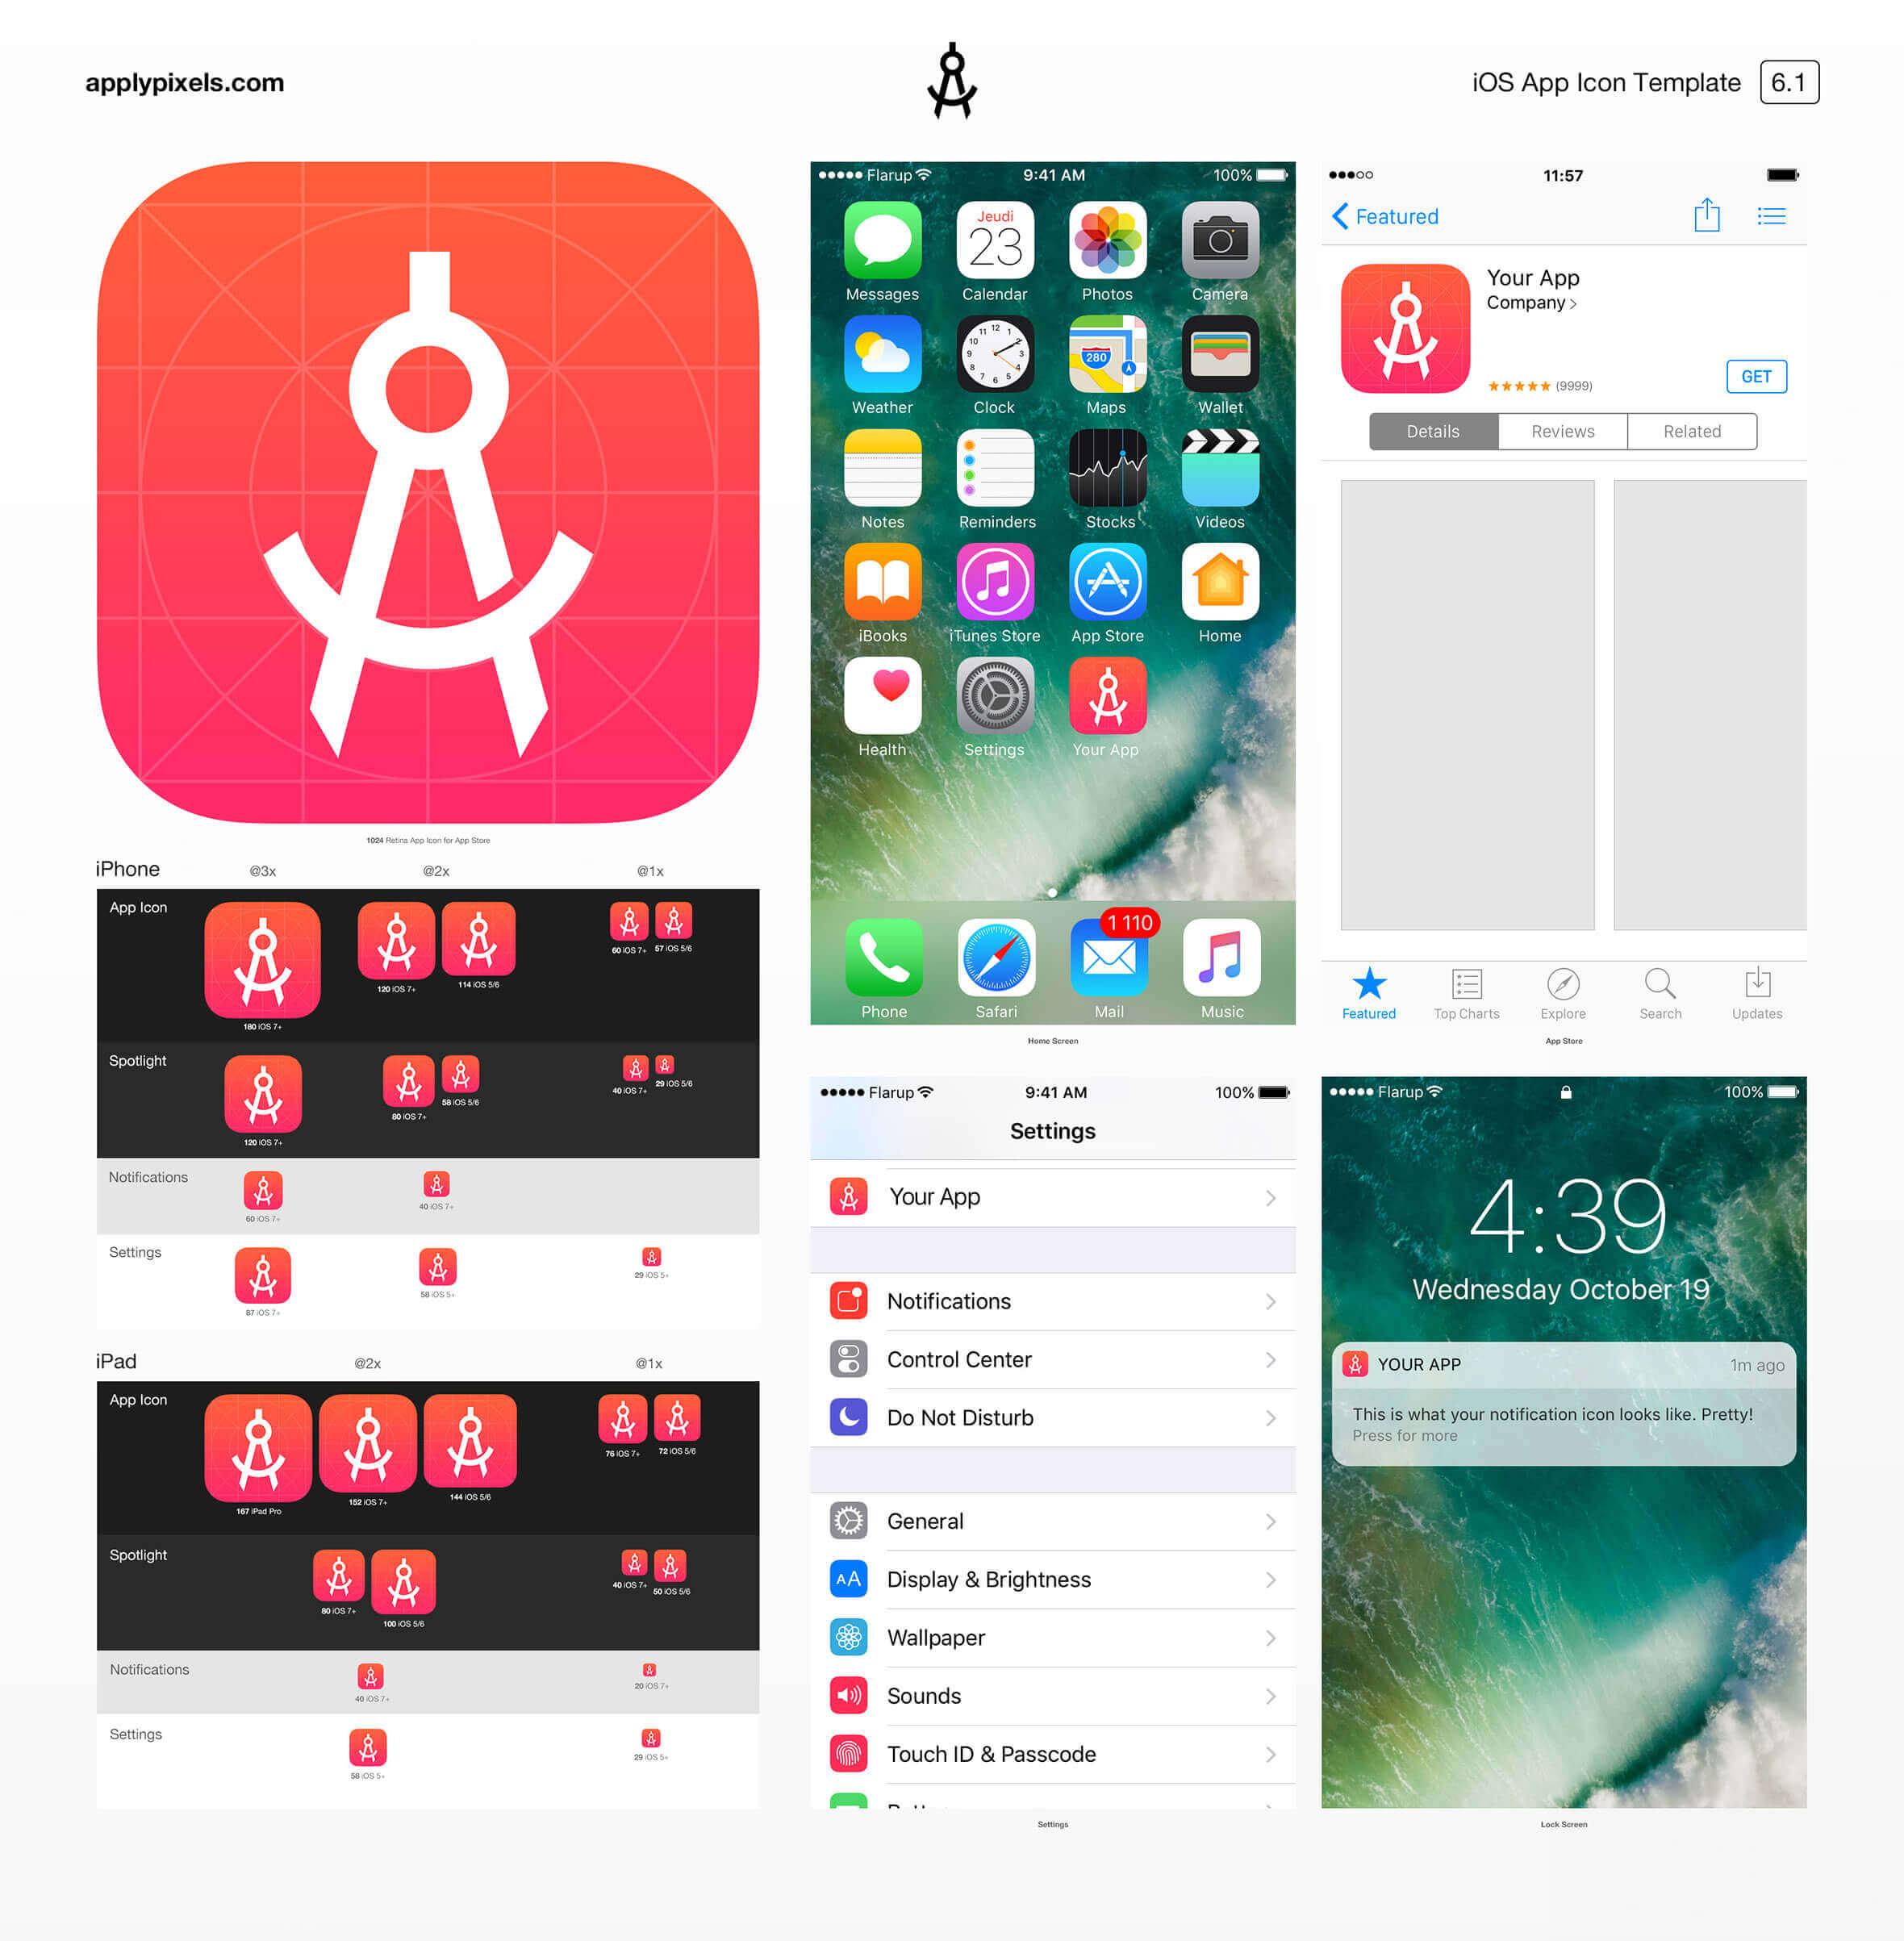 Mobile App Icons Logo - Eye Catching App Icon Design: How To